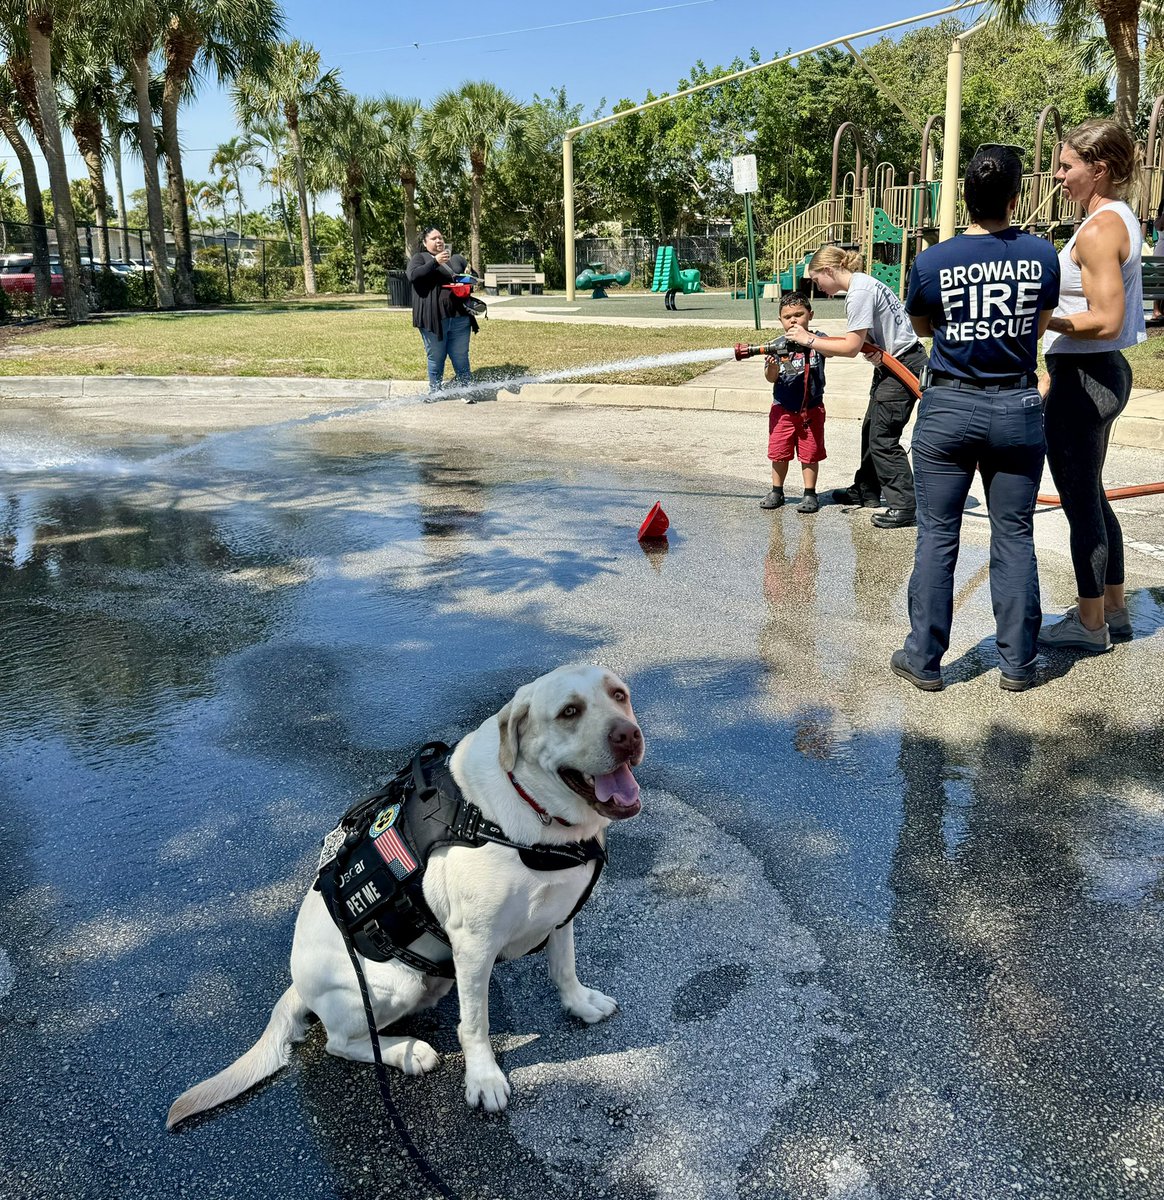 Today we went to an event to support Autism. Beautiful day with beautiful people. #firstresponderspack #giveback #MakeADifference #autismsupport #southflorida #broward #local4321